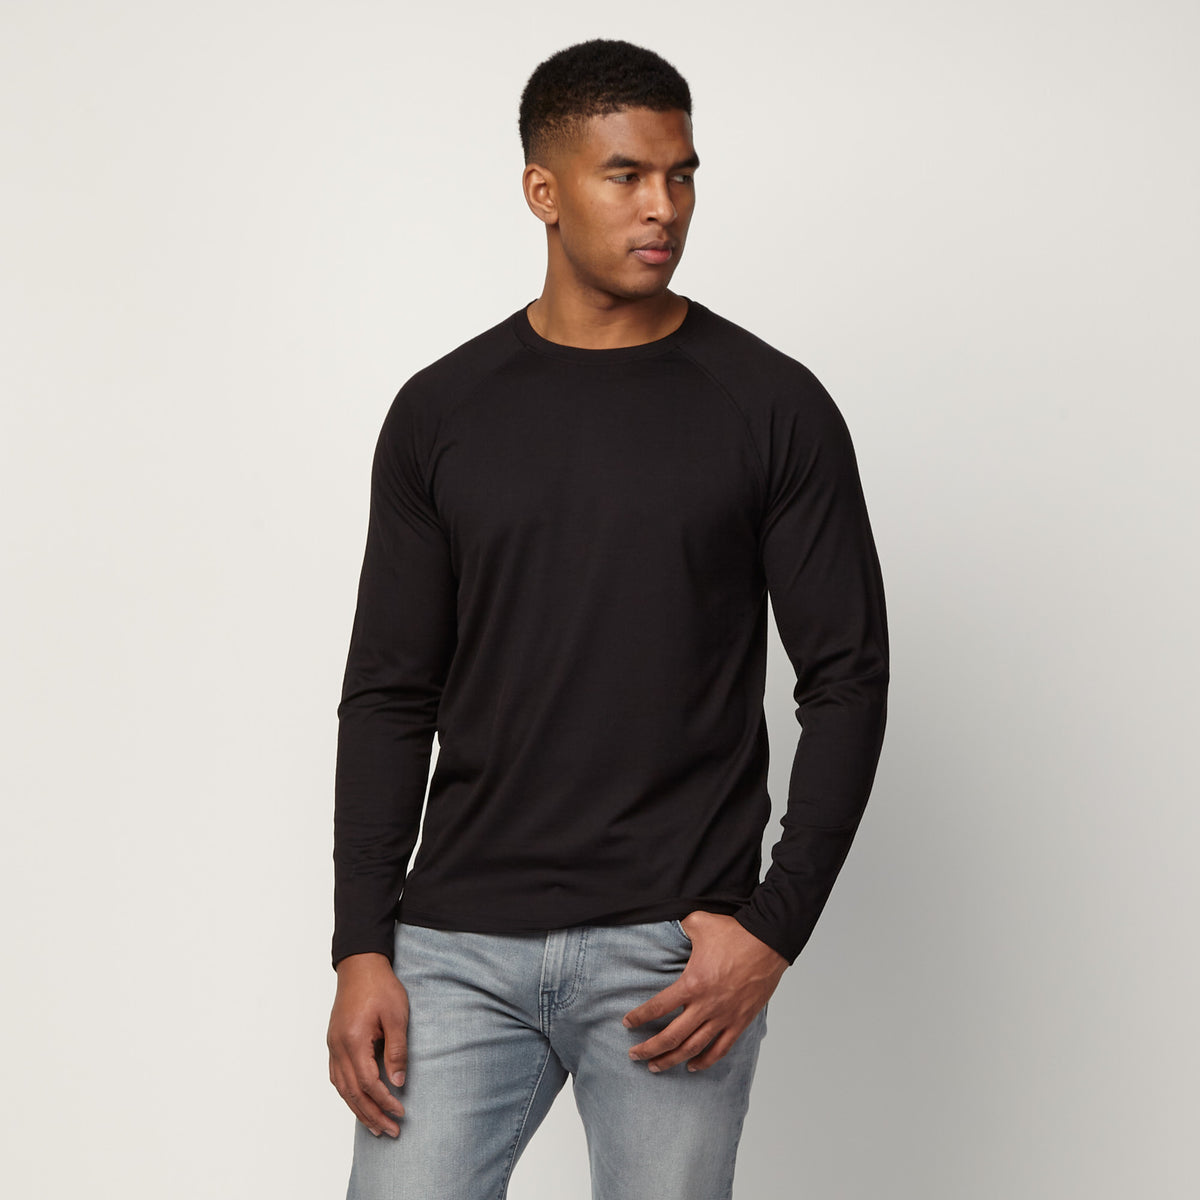 Merino Wool Union Thermal Underwear 250G Base Layer Crew Shirt With Long  Sleeves, Breathable Baselayer, USA Size L231011 From Bingcoholnciaga,  $16.83